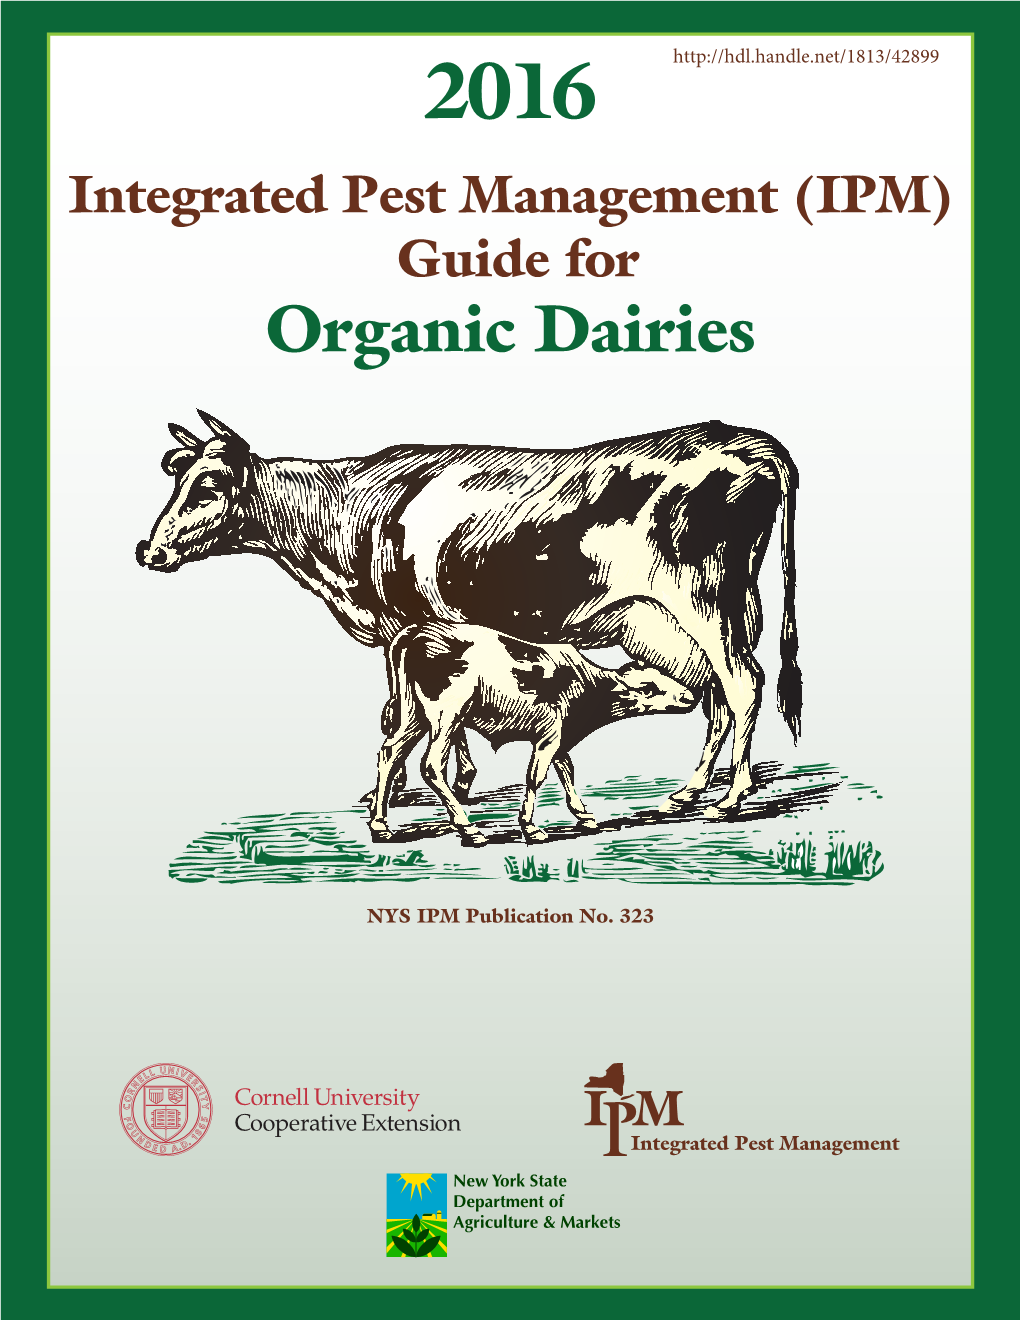 Integrated Pest Management (IPM) Guide for Organic Dairies